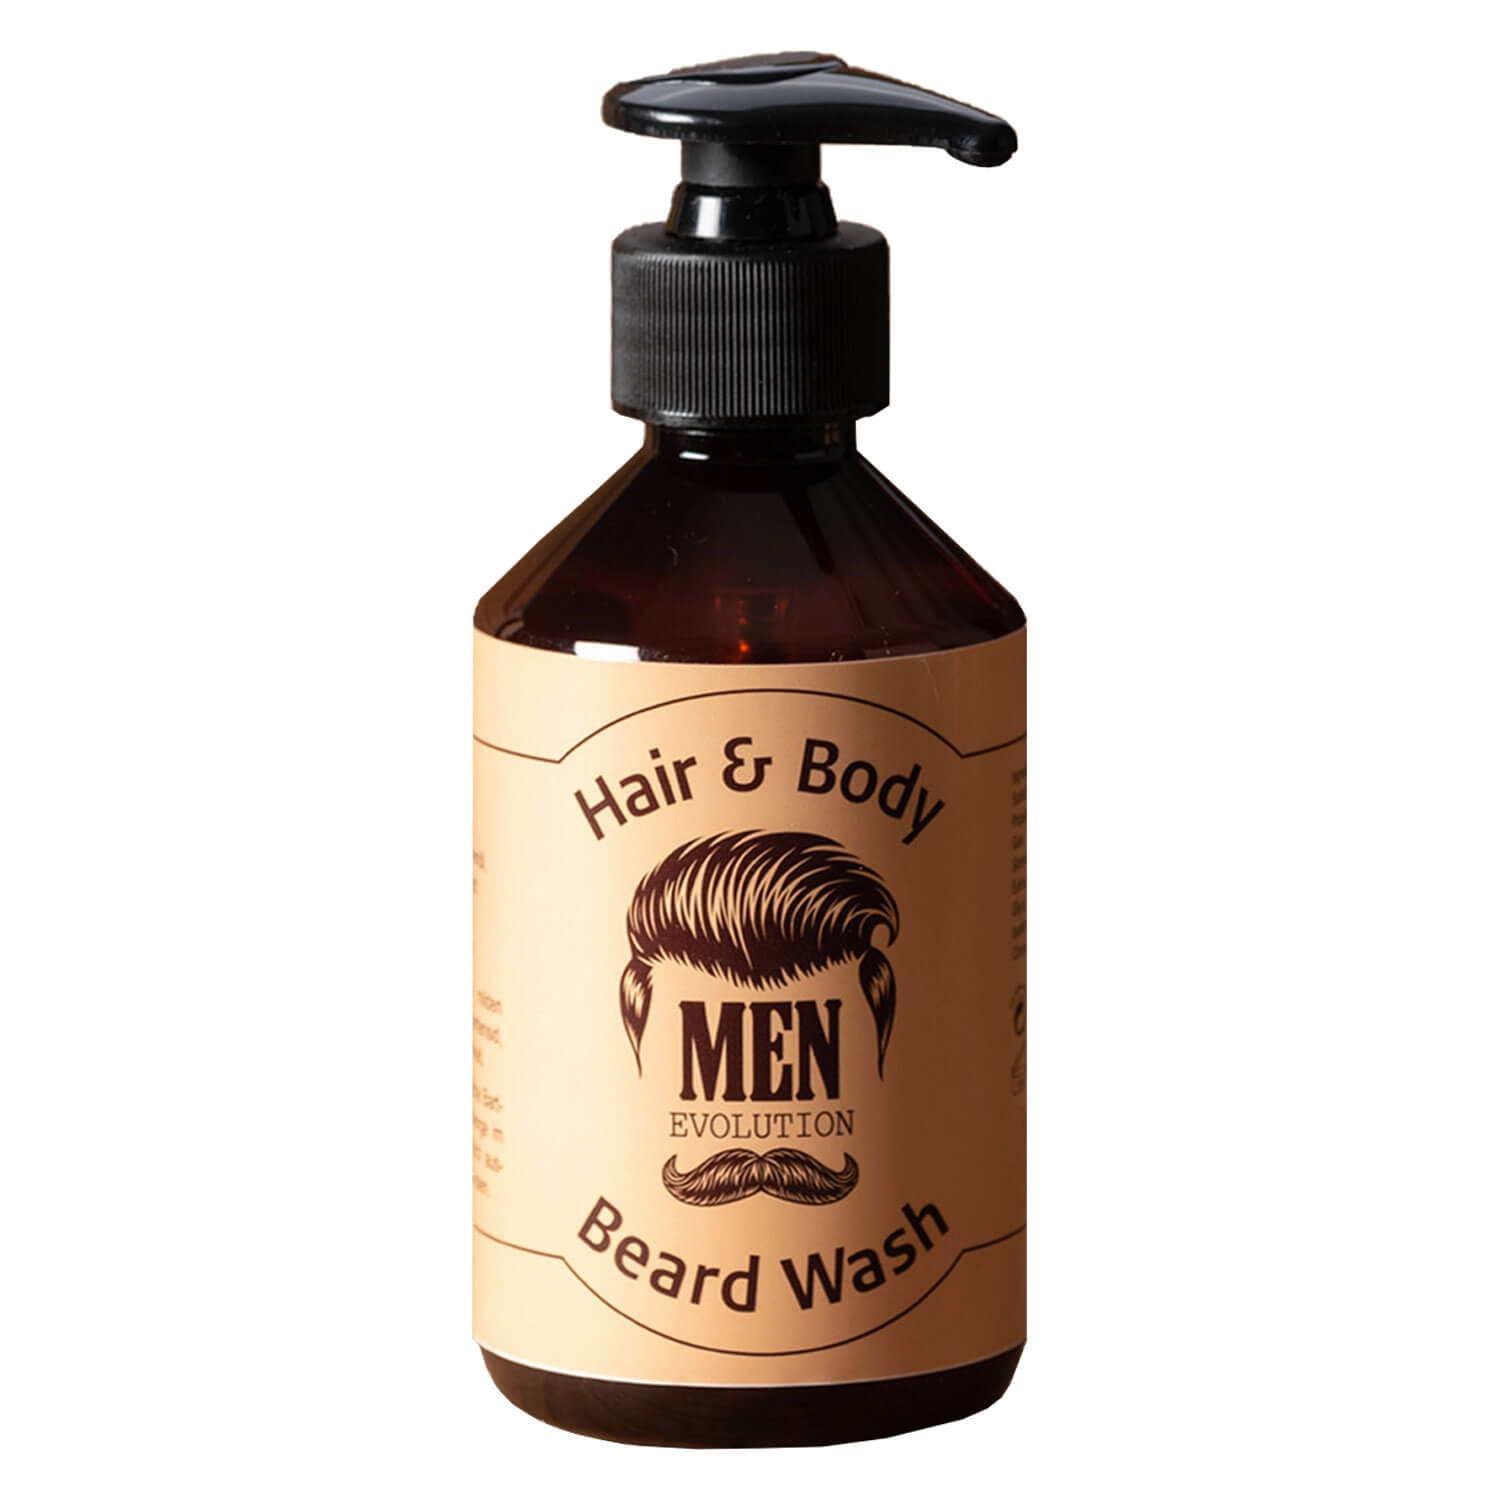 Product image from MEN Evolution - Hair & Body Beard Wash